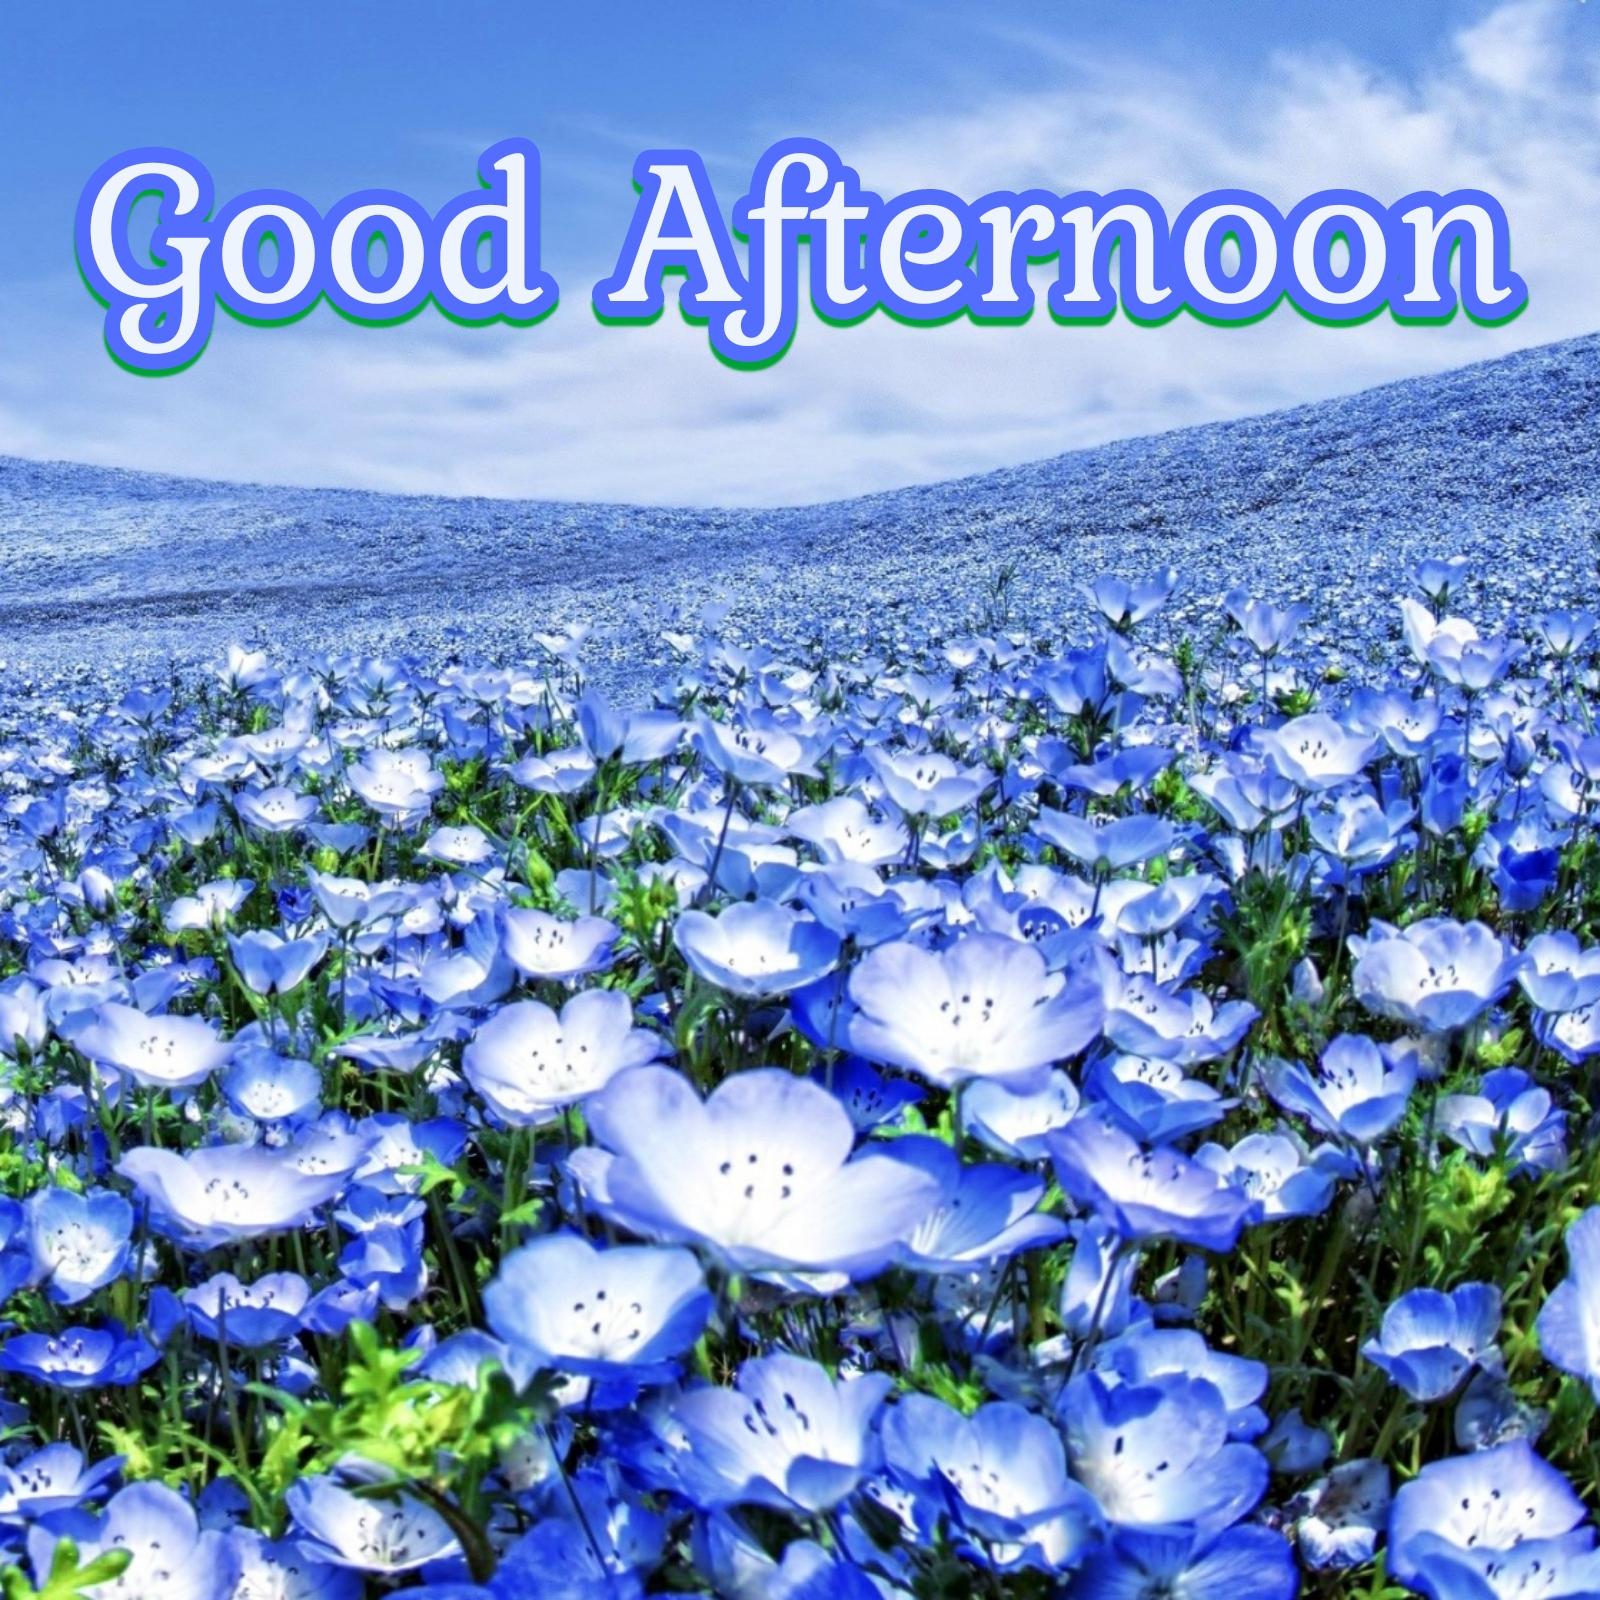 Images Of Good Afternoon